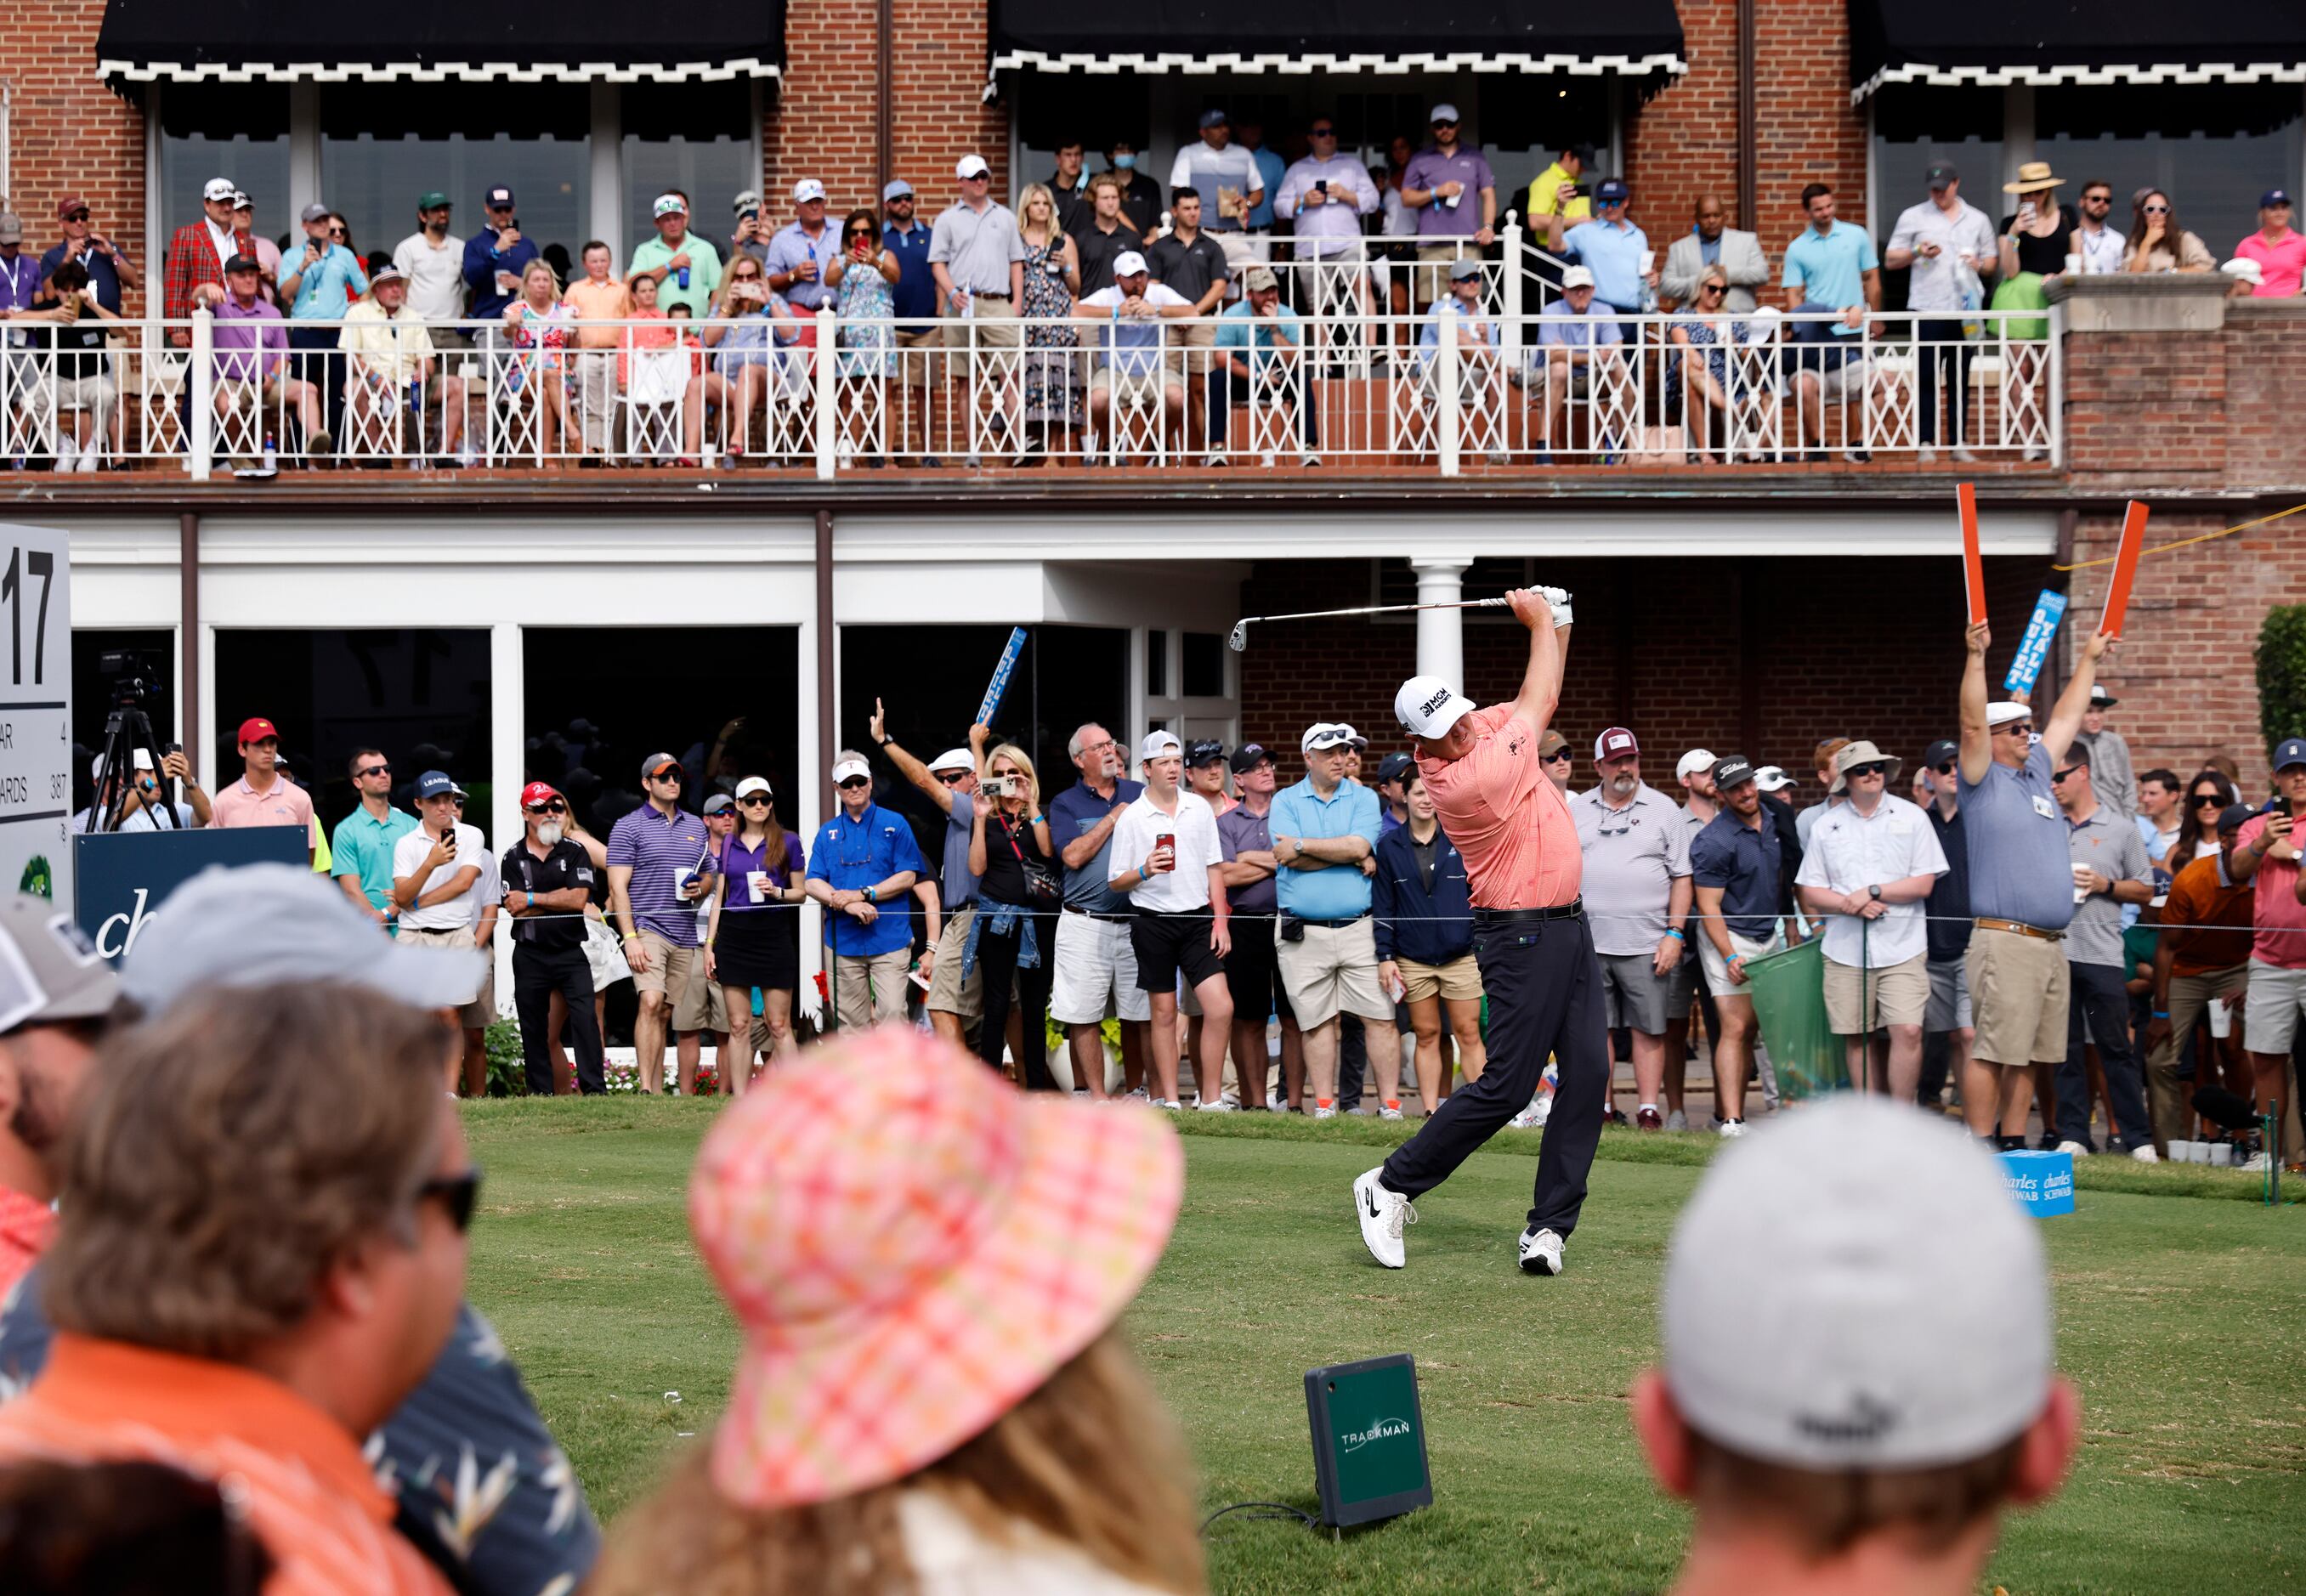 Before gallery full of fans, professional golfer Jason Kokrak fires his tee shot on the...